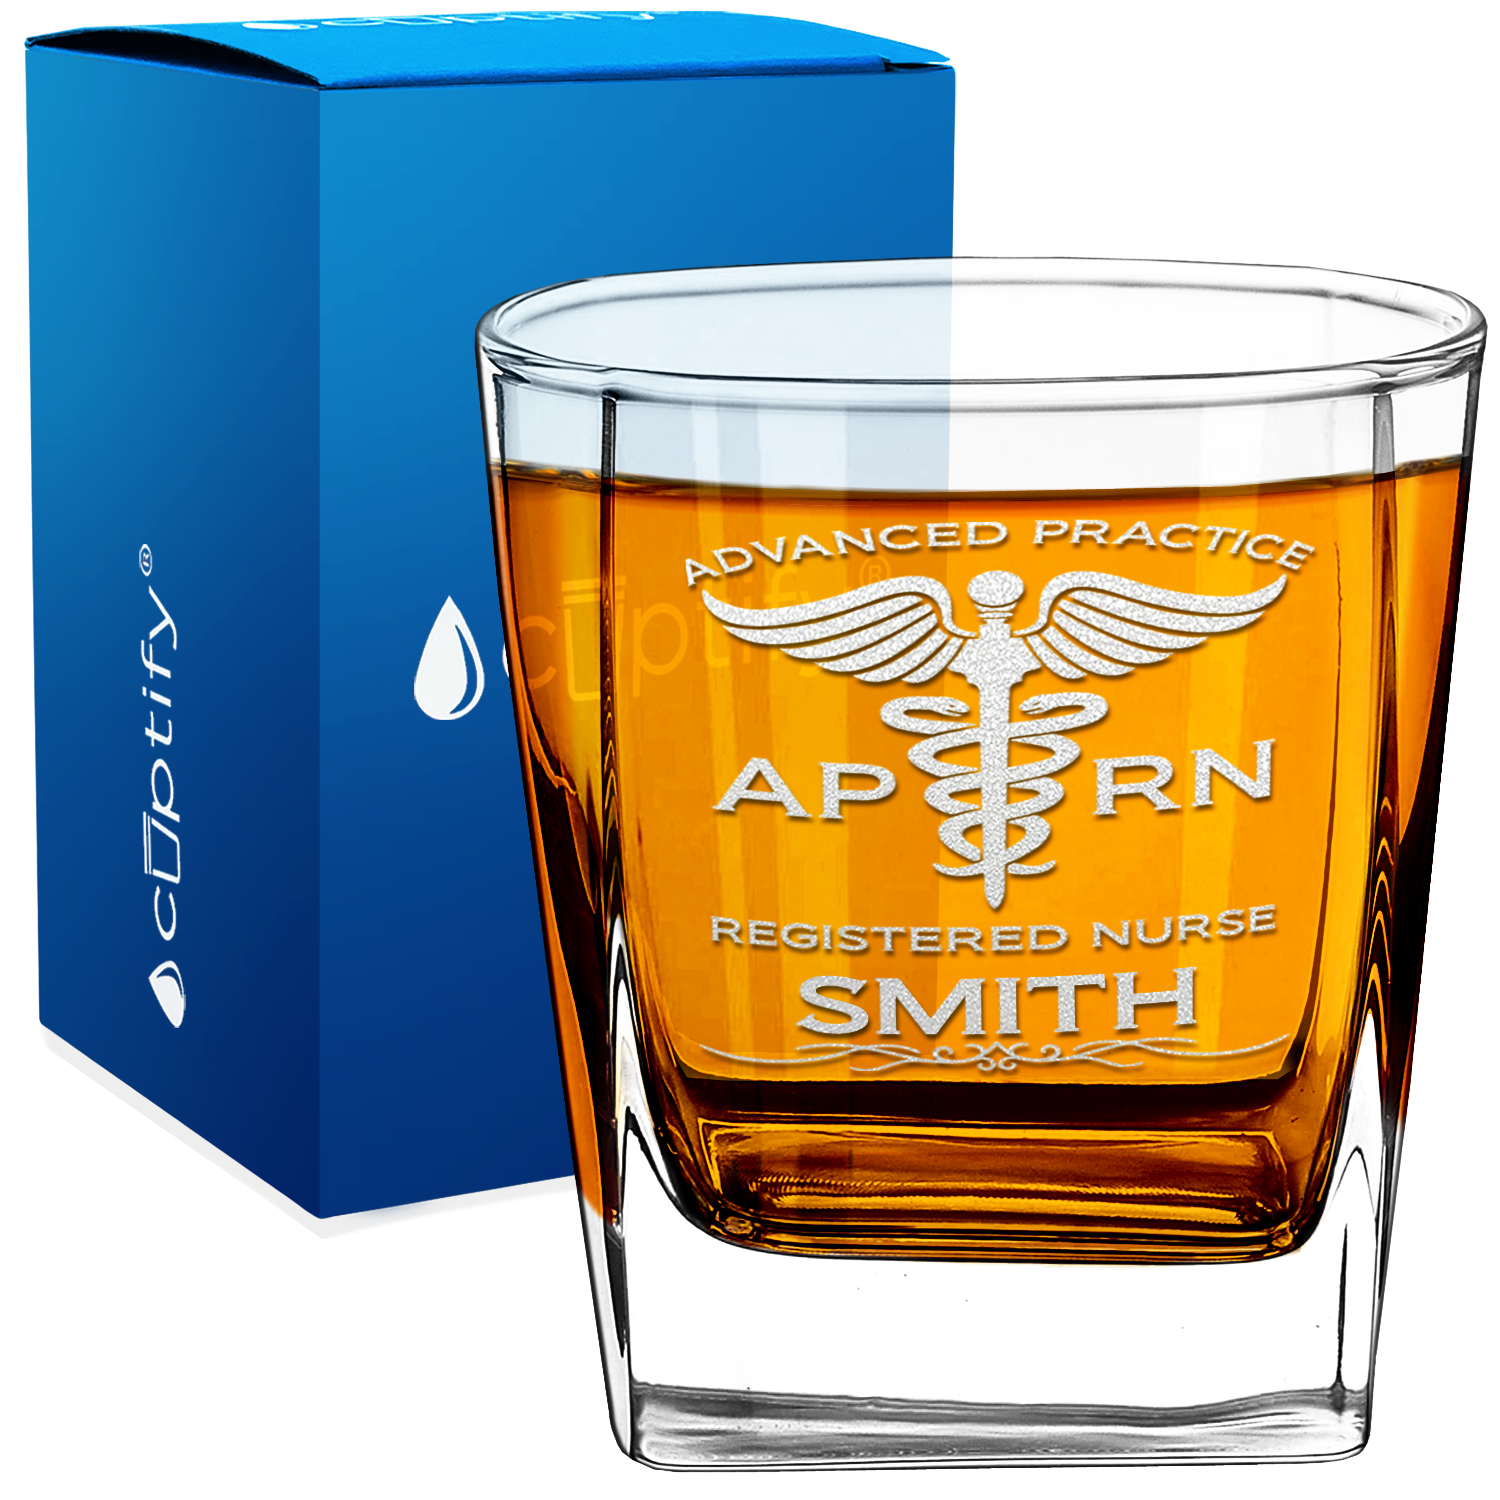 Personalized APRN Advanced Practice Registered Nurse on 12oz Double Old Fashioned Glass